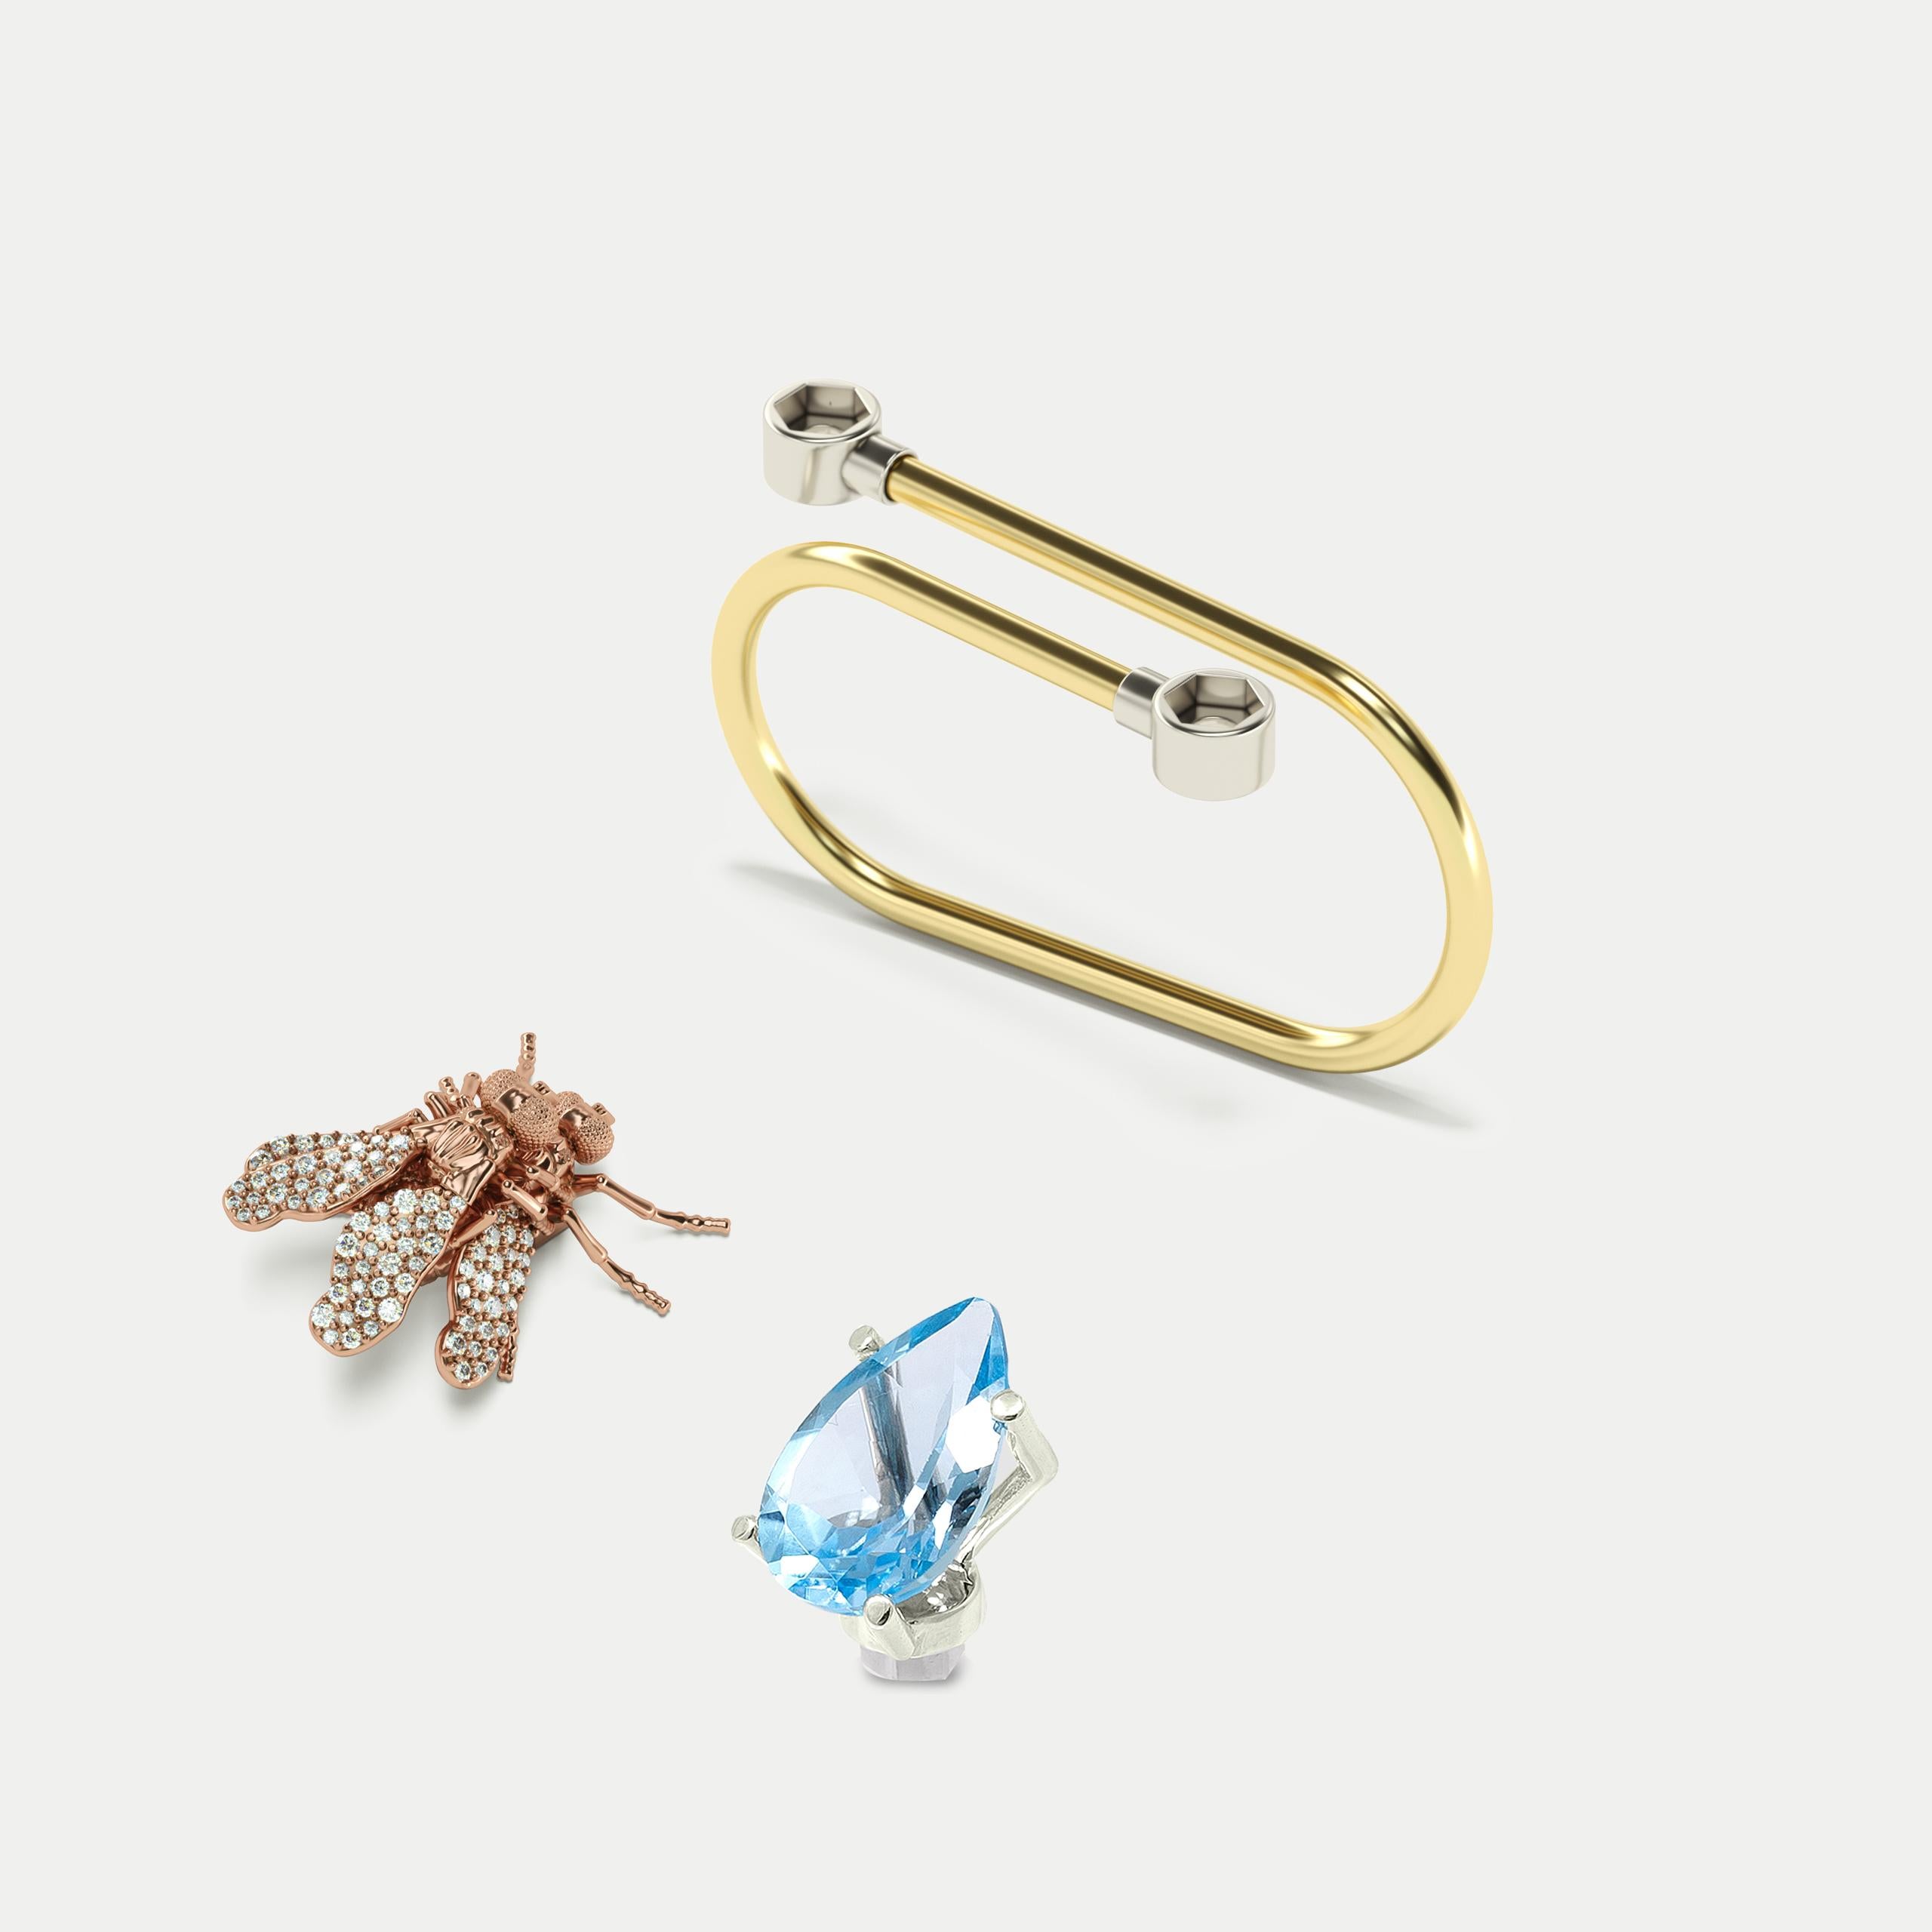 This cocktail ring for two fingers is made of 18K gold and decorated with removable Blue Sky Topaz and Flies figure in pink gold with white diamonds.
·Ring in Yellow Gold, 18K
·Flyonfly in pink gold, 18K with Full pavé in wings of White Diamonds